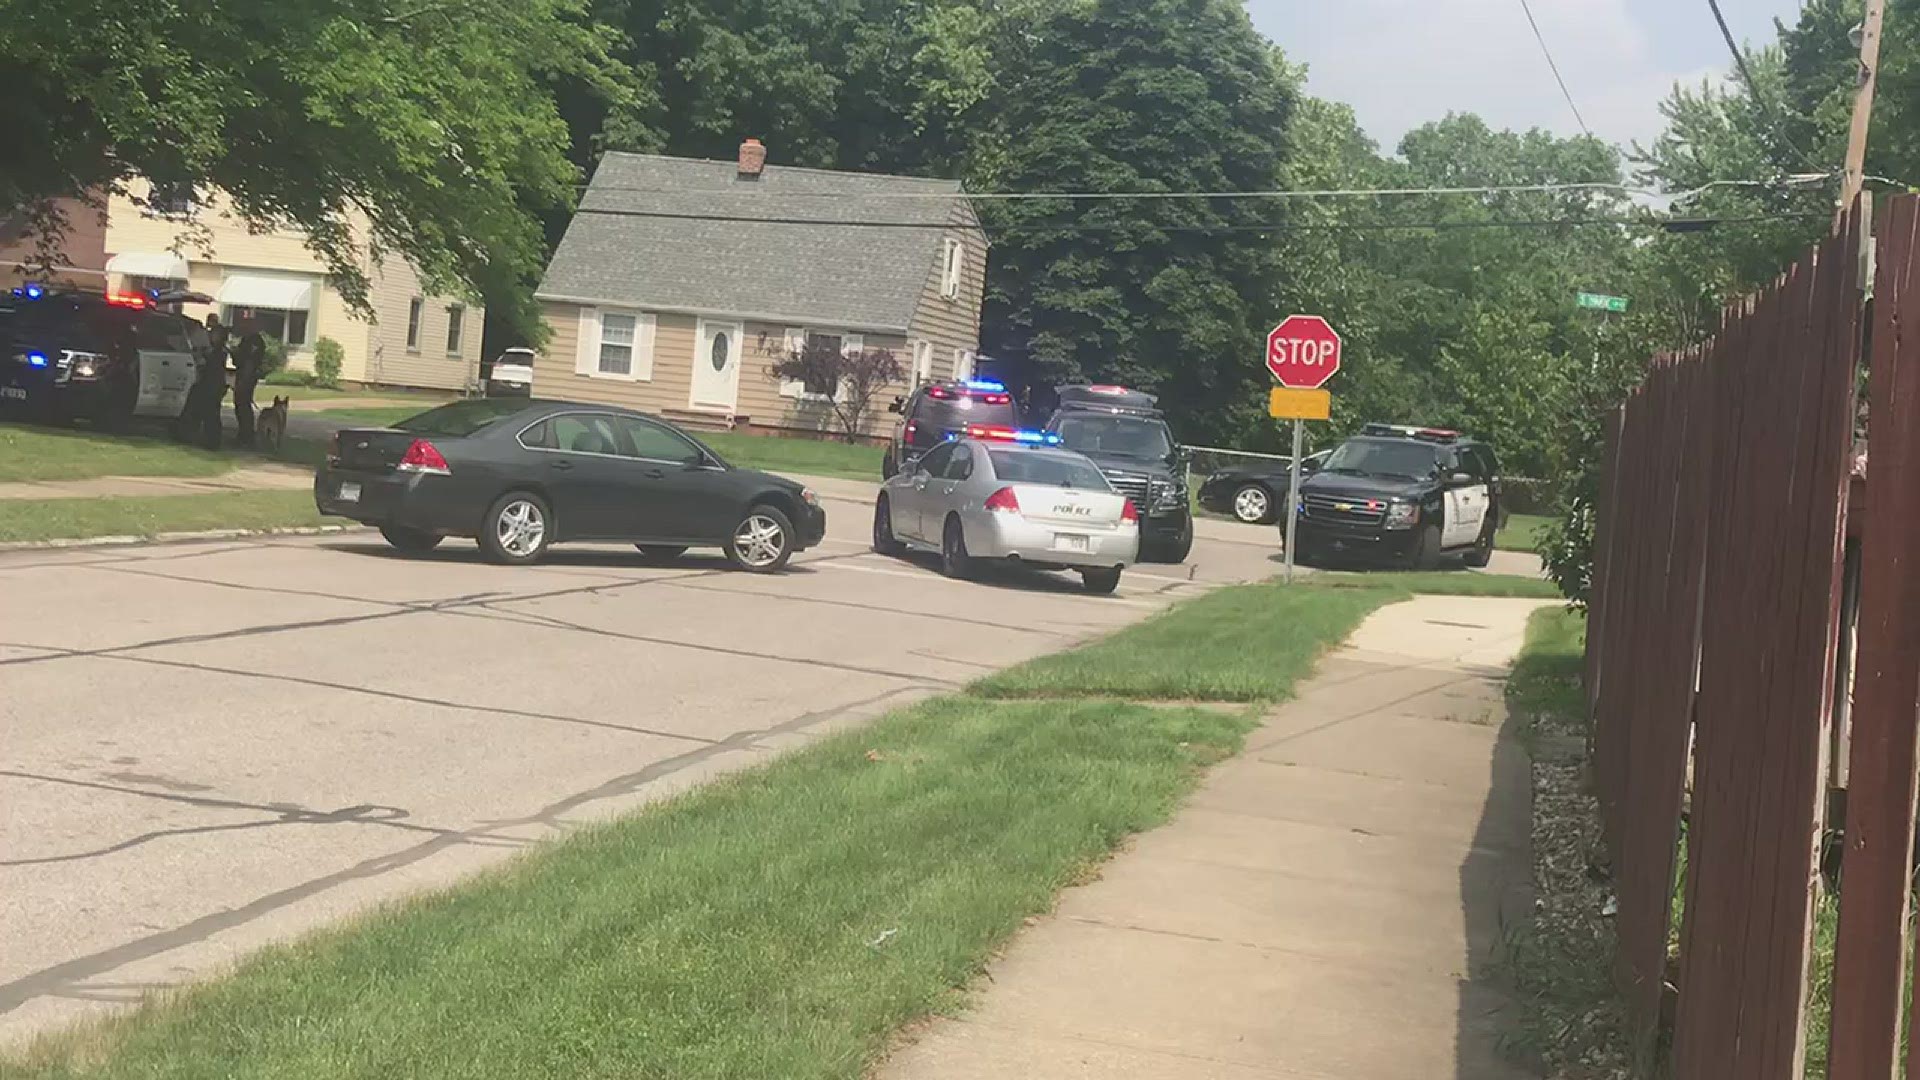 Parma police officers on scene at a stand-off outside of a home in the city. According to officials, the incident took place near Lucerne Avenue and S. Park Blvd.